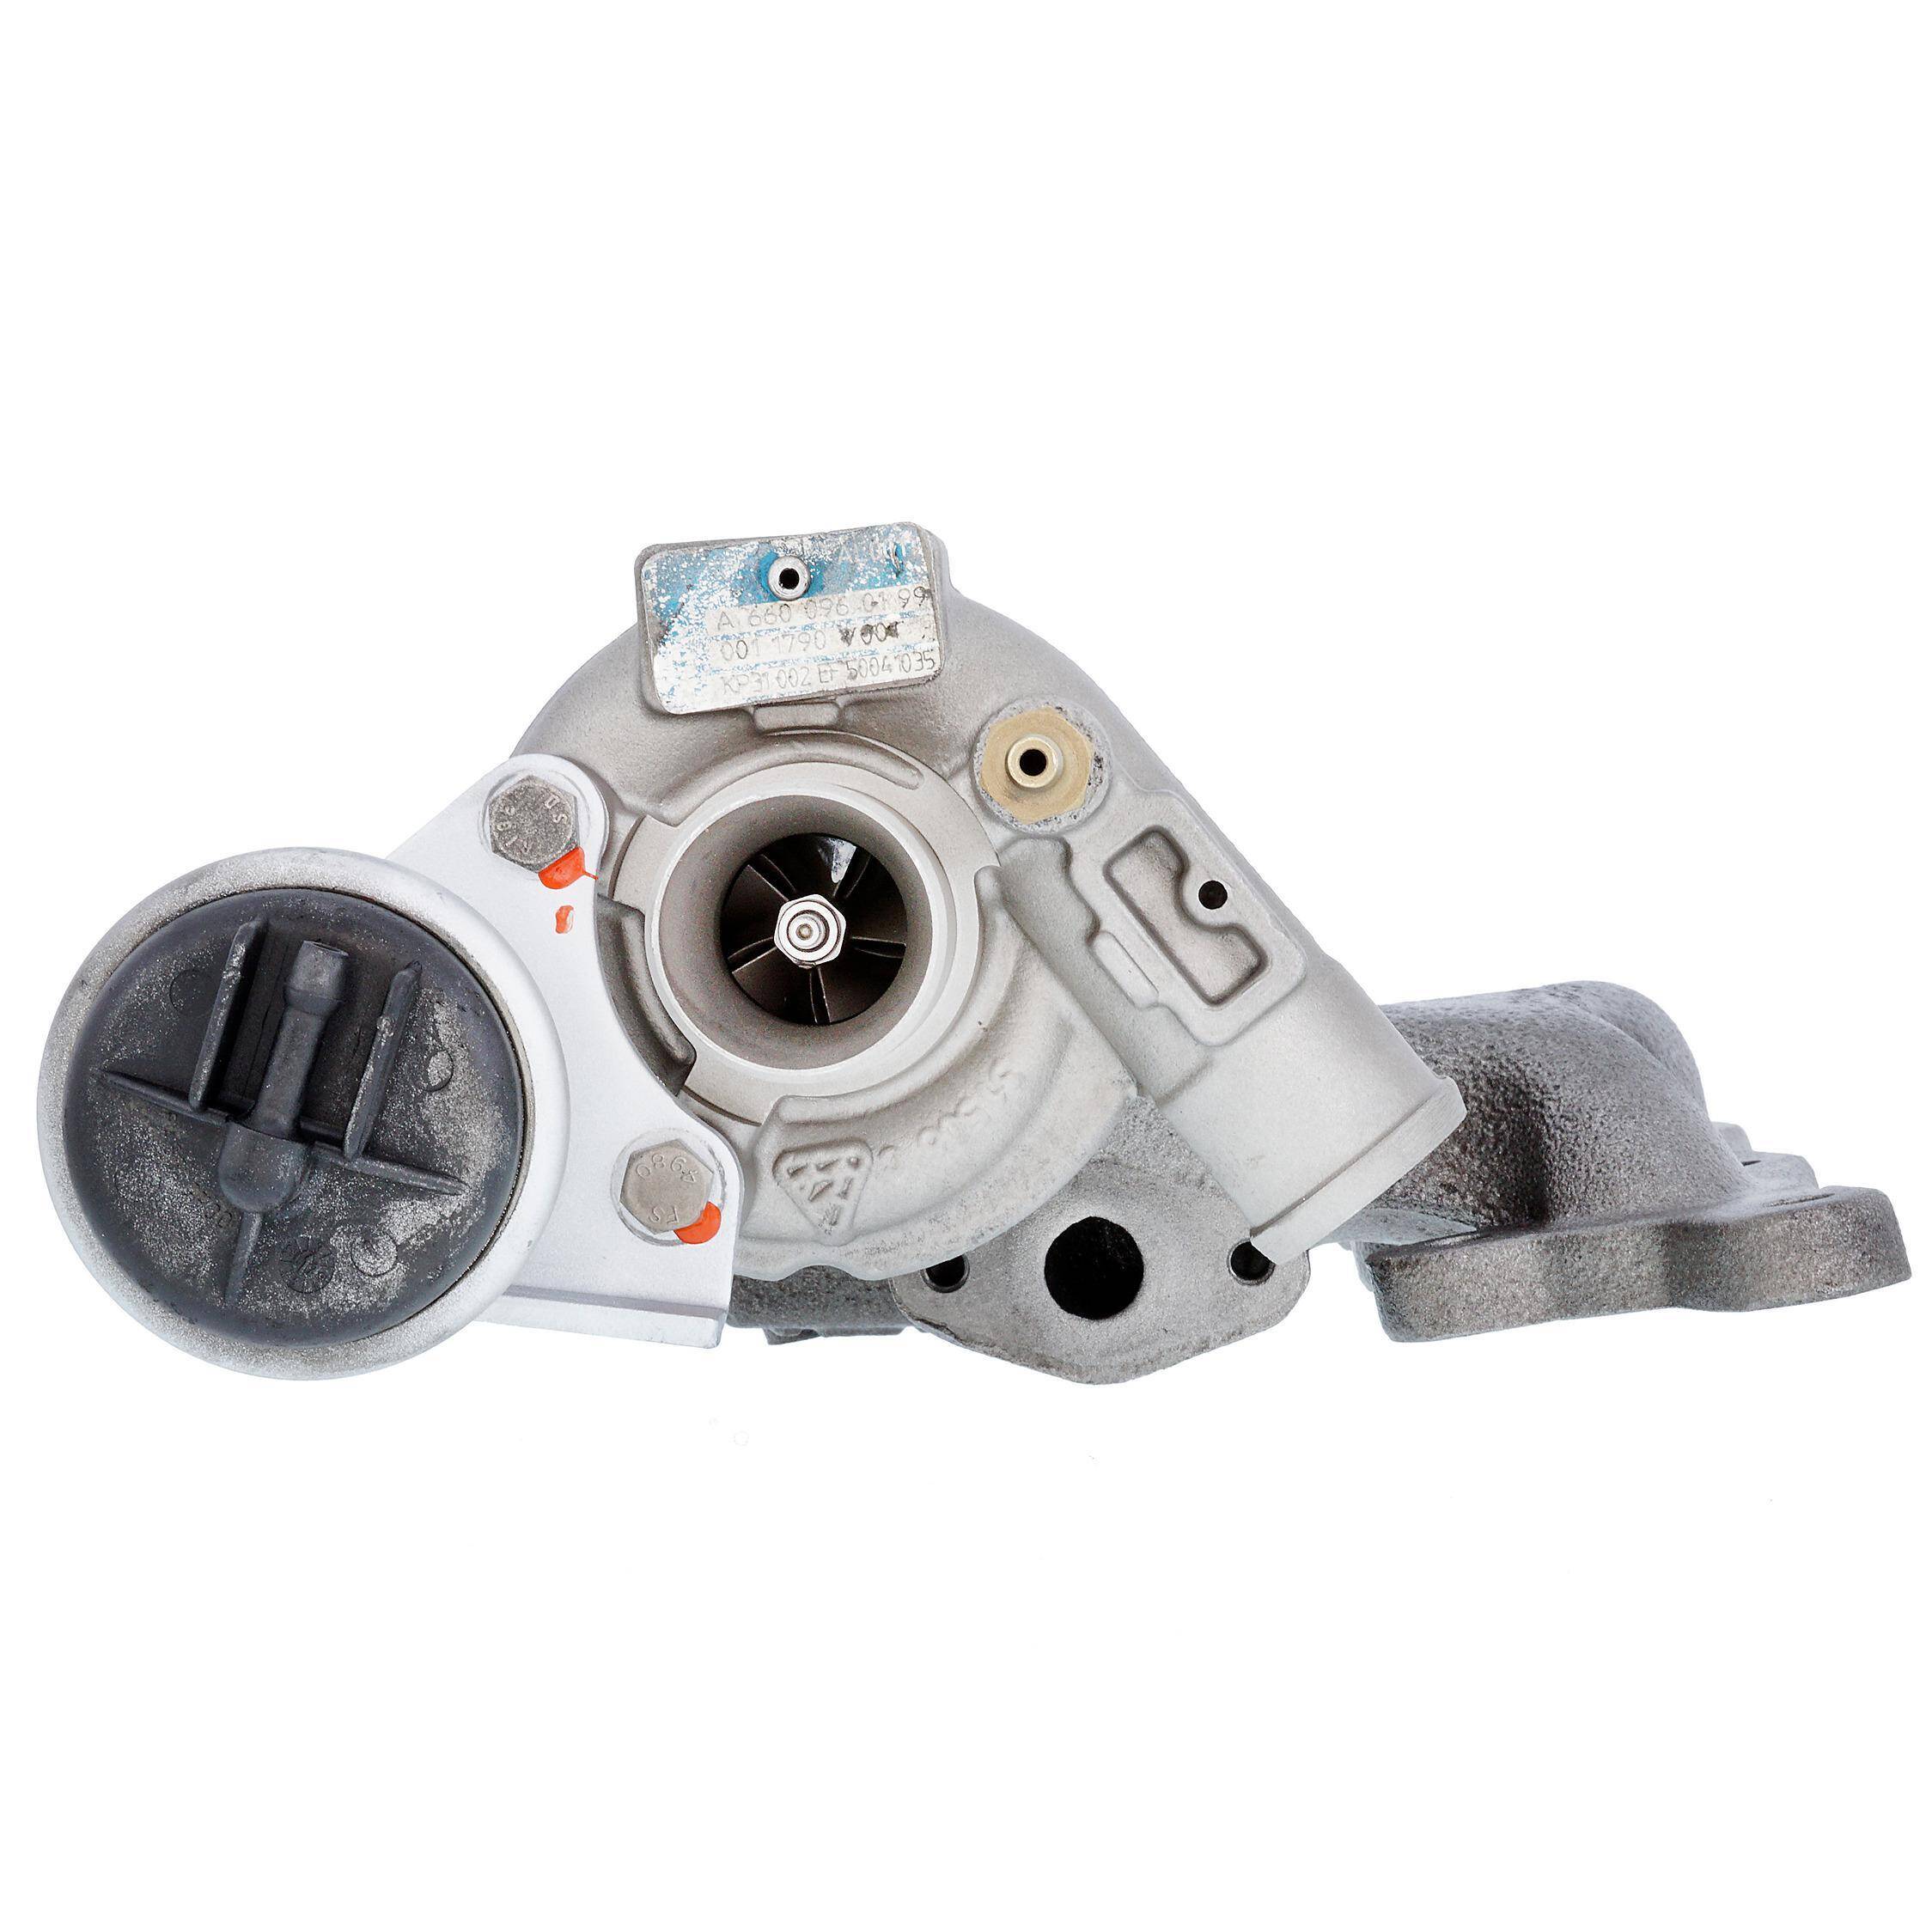 TURBOCHARGER TURBO REMANUFACTURED 54319700000 54319880000